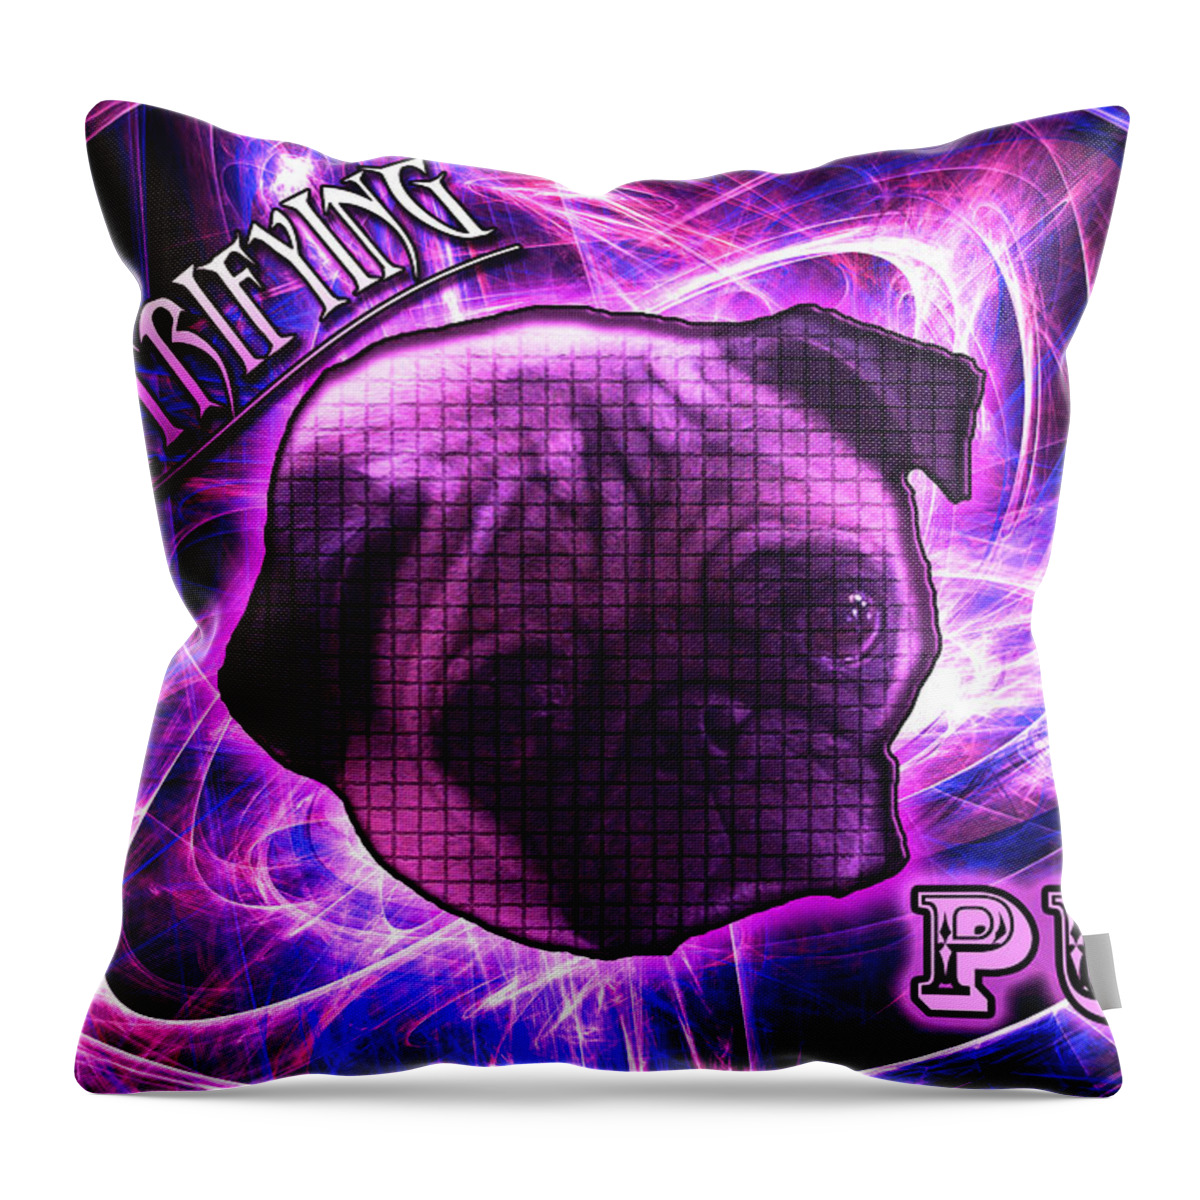 Pug Throw Pillow featuring the digital art Electrifying Pug by Michael Stowers